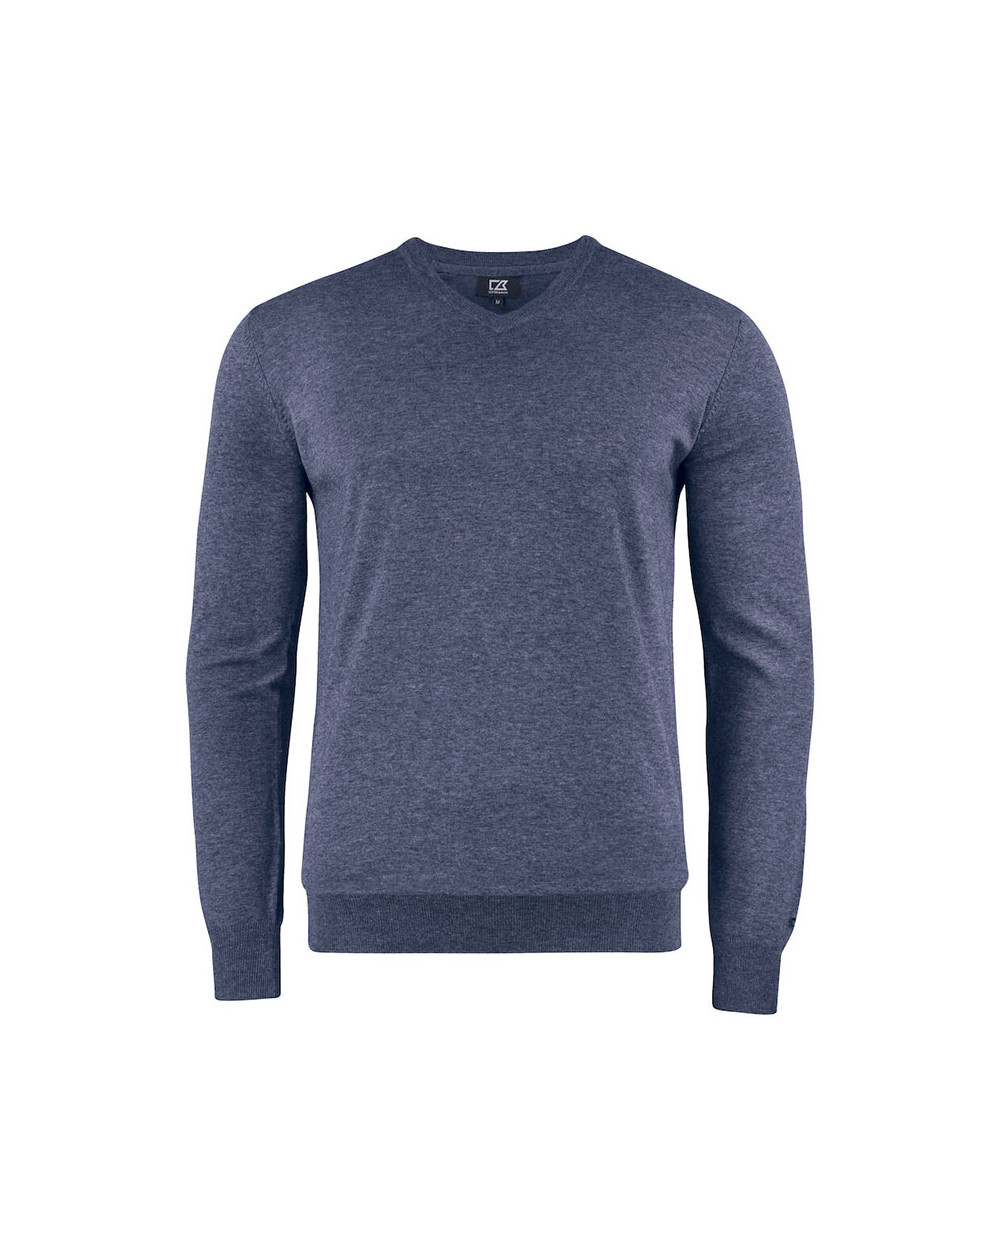 Pull col v Femme à manches longues de Marque pull hiver homme pull